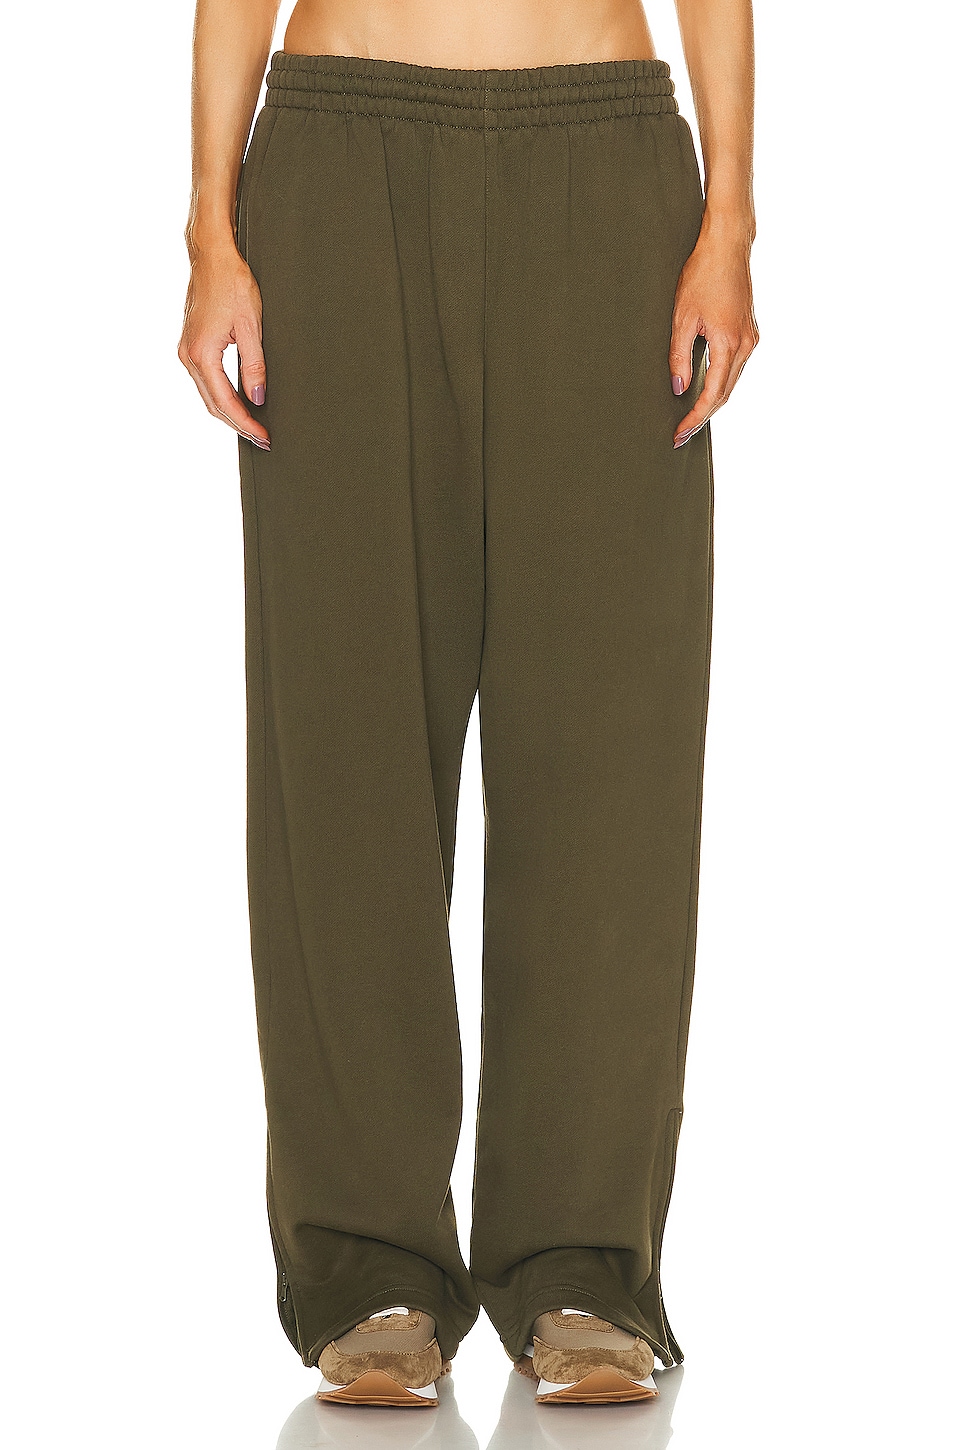 HB Track Pant in Olive